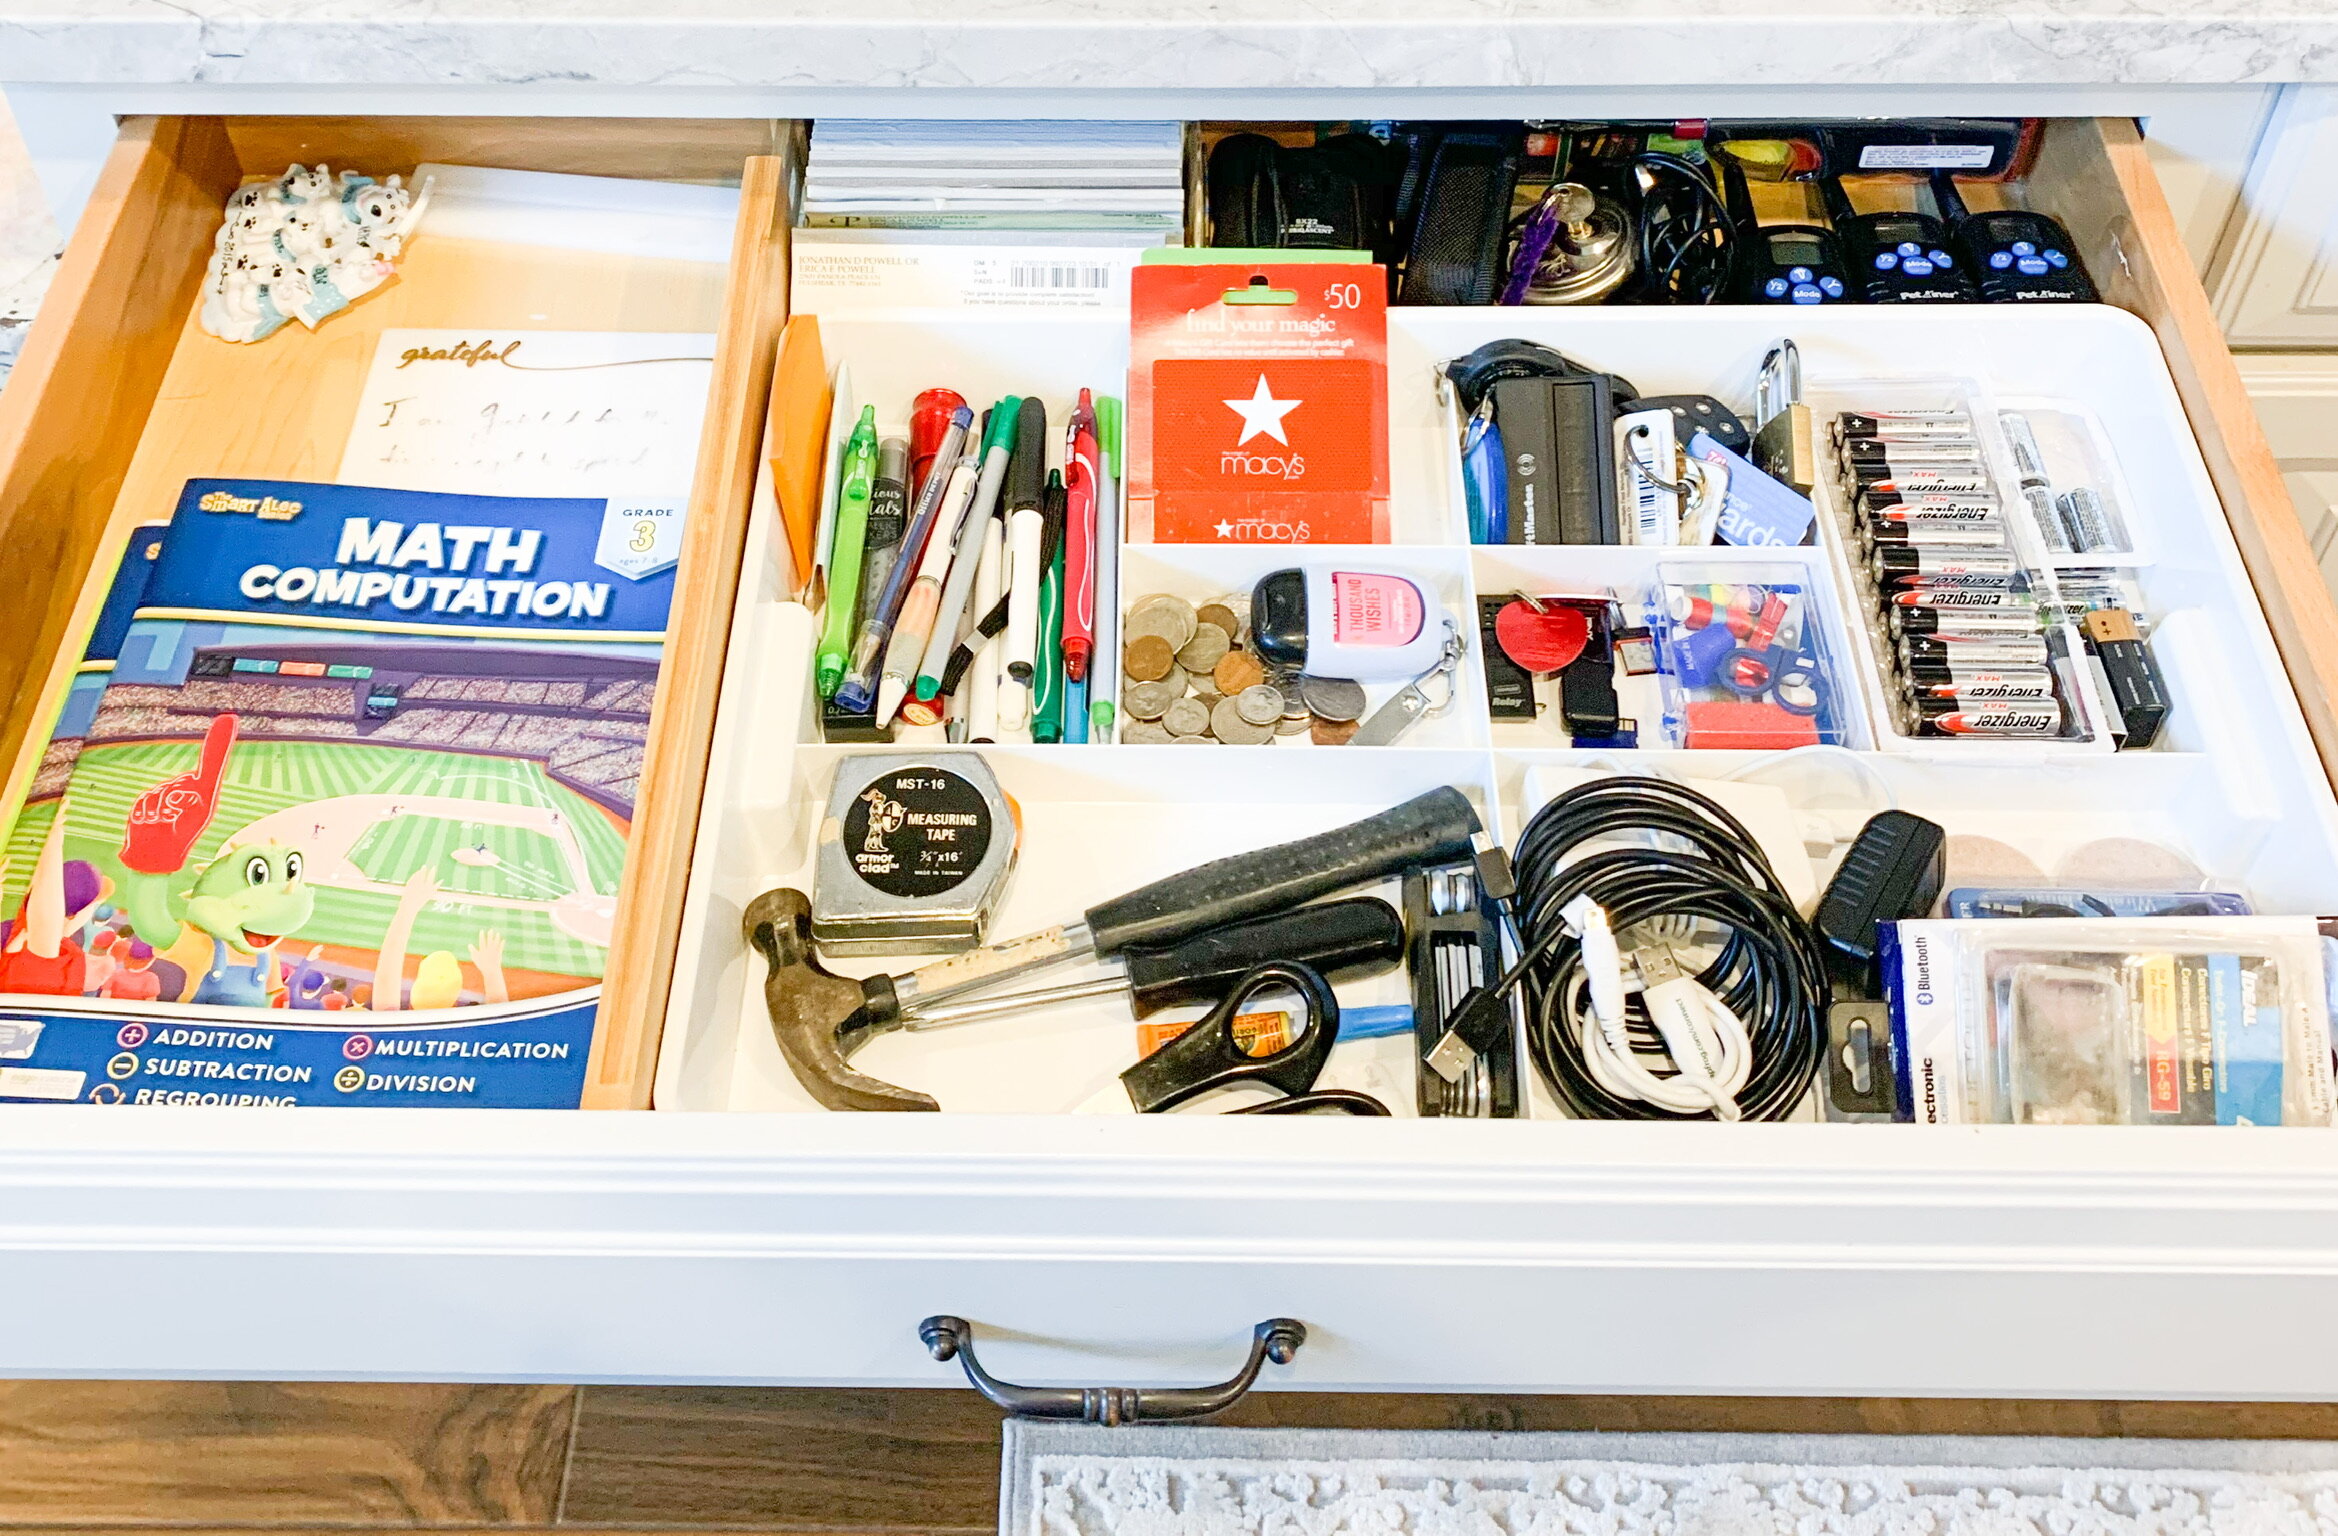 Even a junk drawer can be Simplified, Systematized, and Sustained!